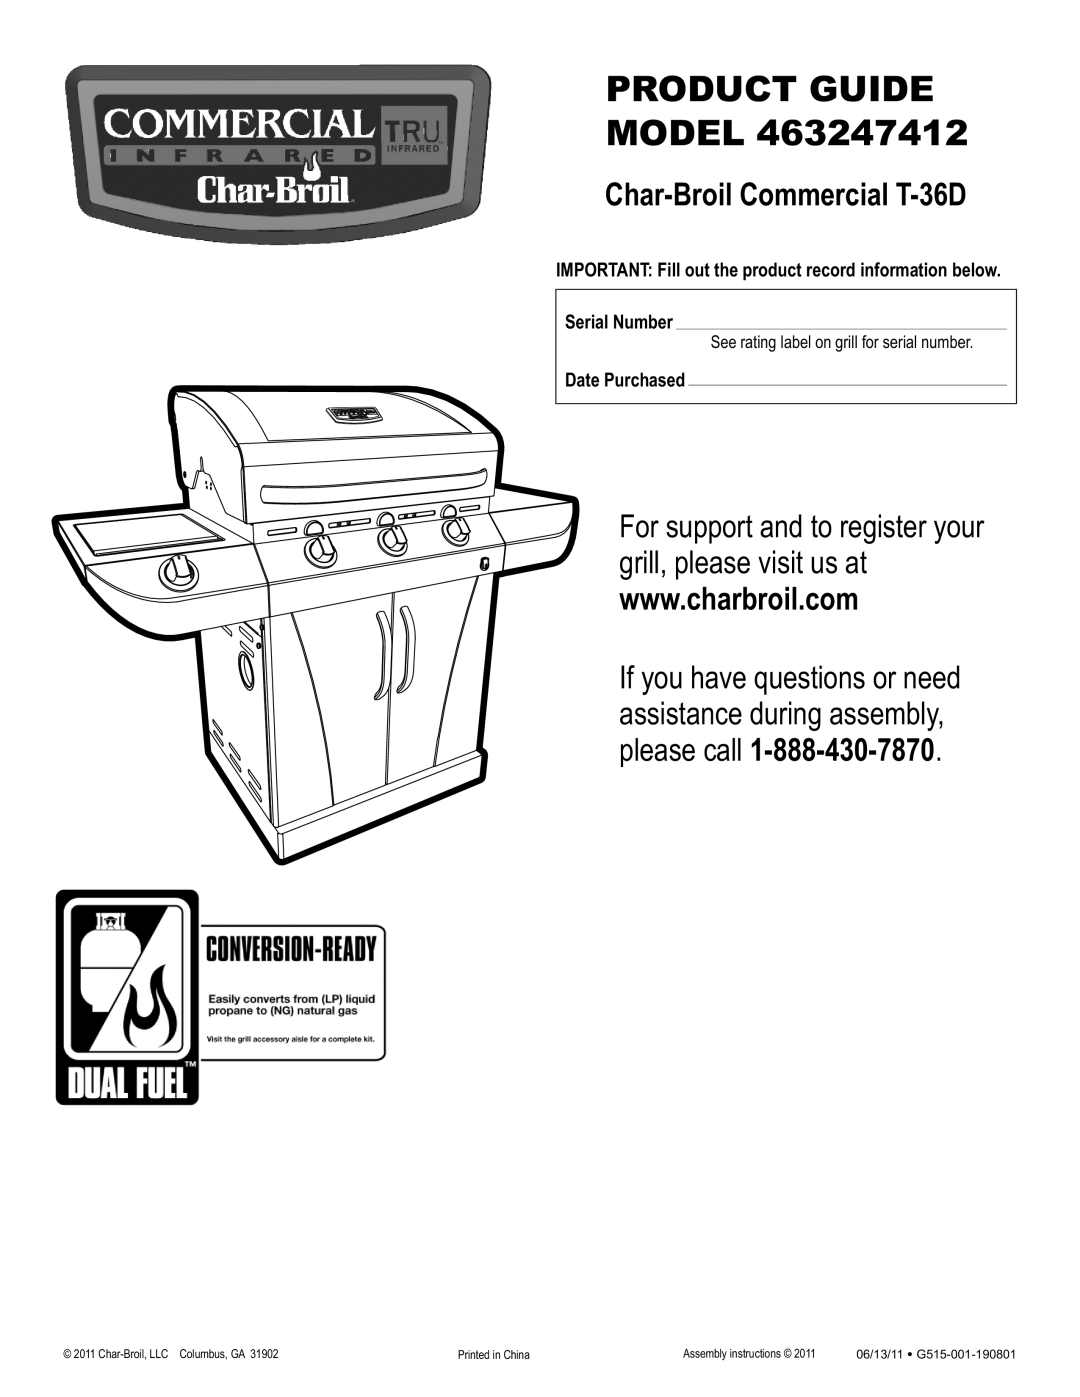 Char-Broil 463247412 manual Char-Broil Commercial T-36D, please call, Product Guide Model, Date Purchased 